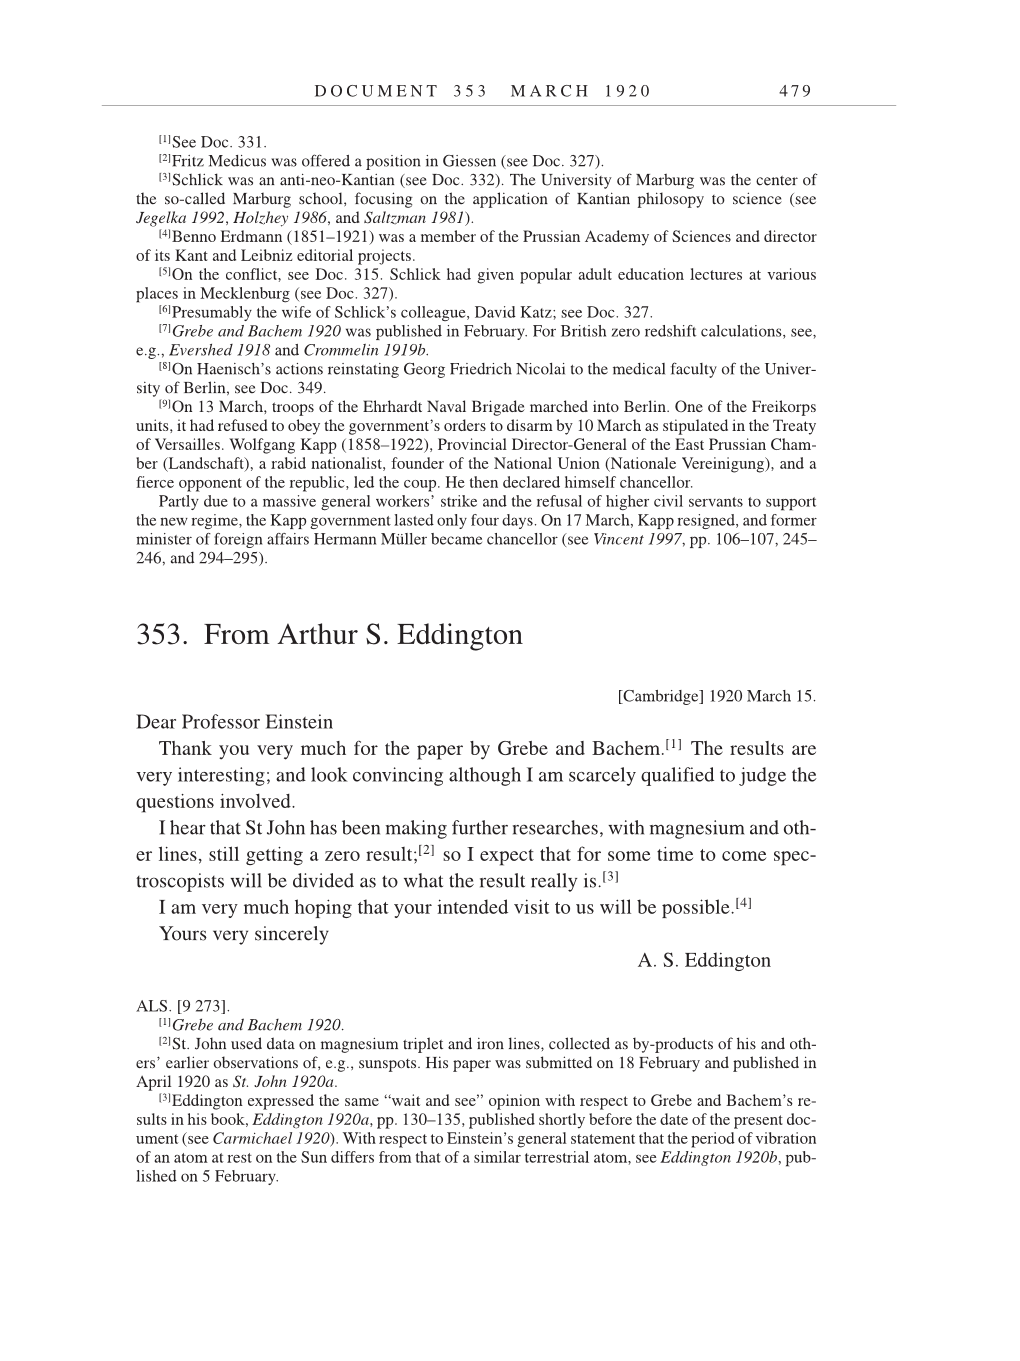 Volume 9: The Berlin Years: Correspondence January 1919-April 1920 page 479